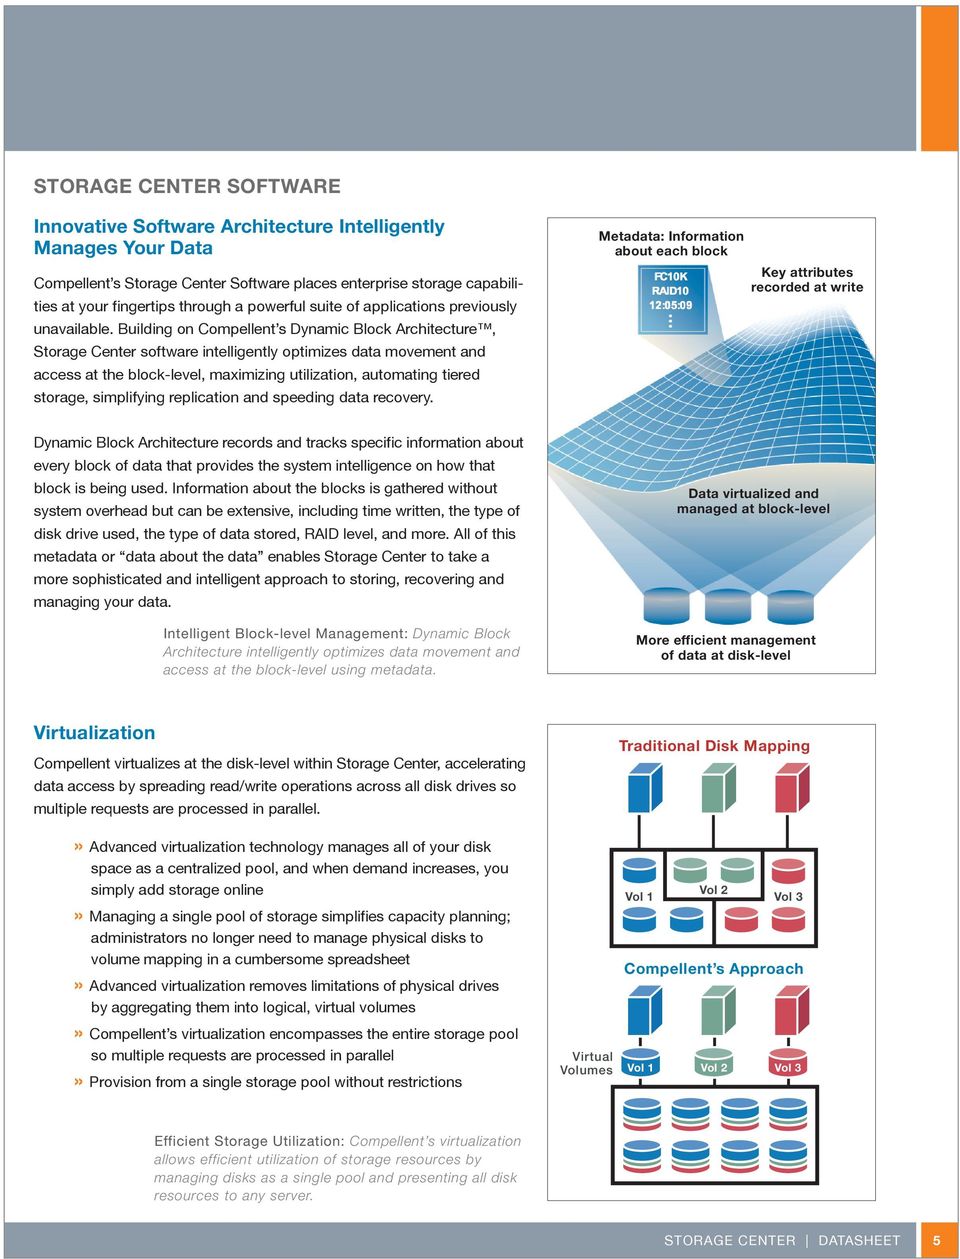 Building on Compellent s Dynamic Block Architecture, Storage Center software intelligently optimizes data movement and access at the block-level, maximizing utilization, automating tiered storage,